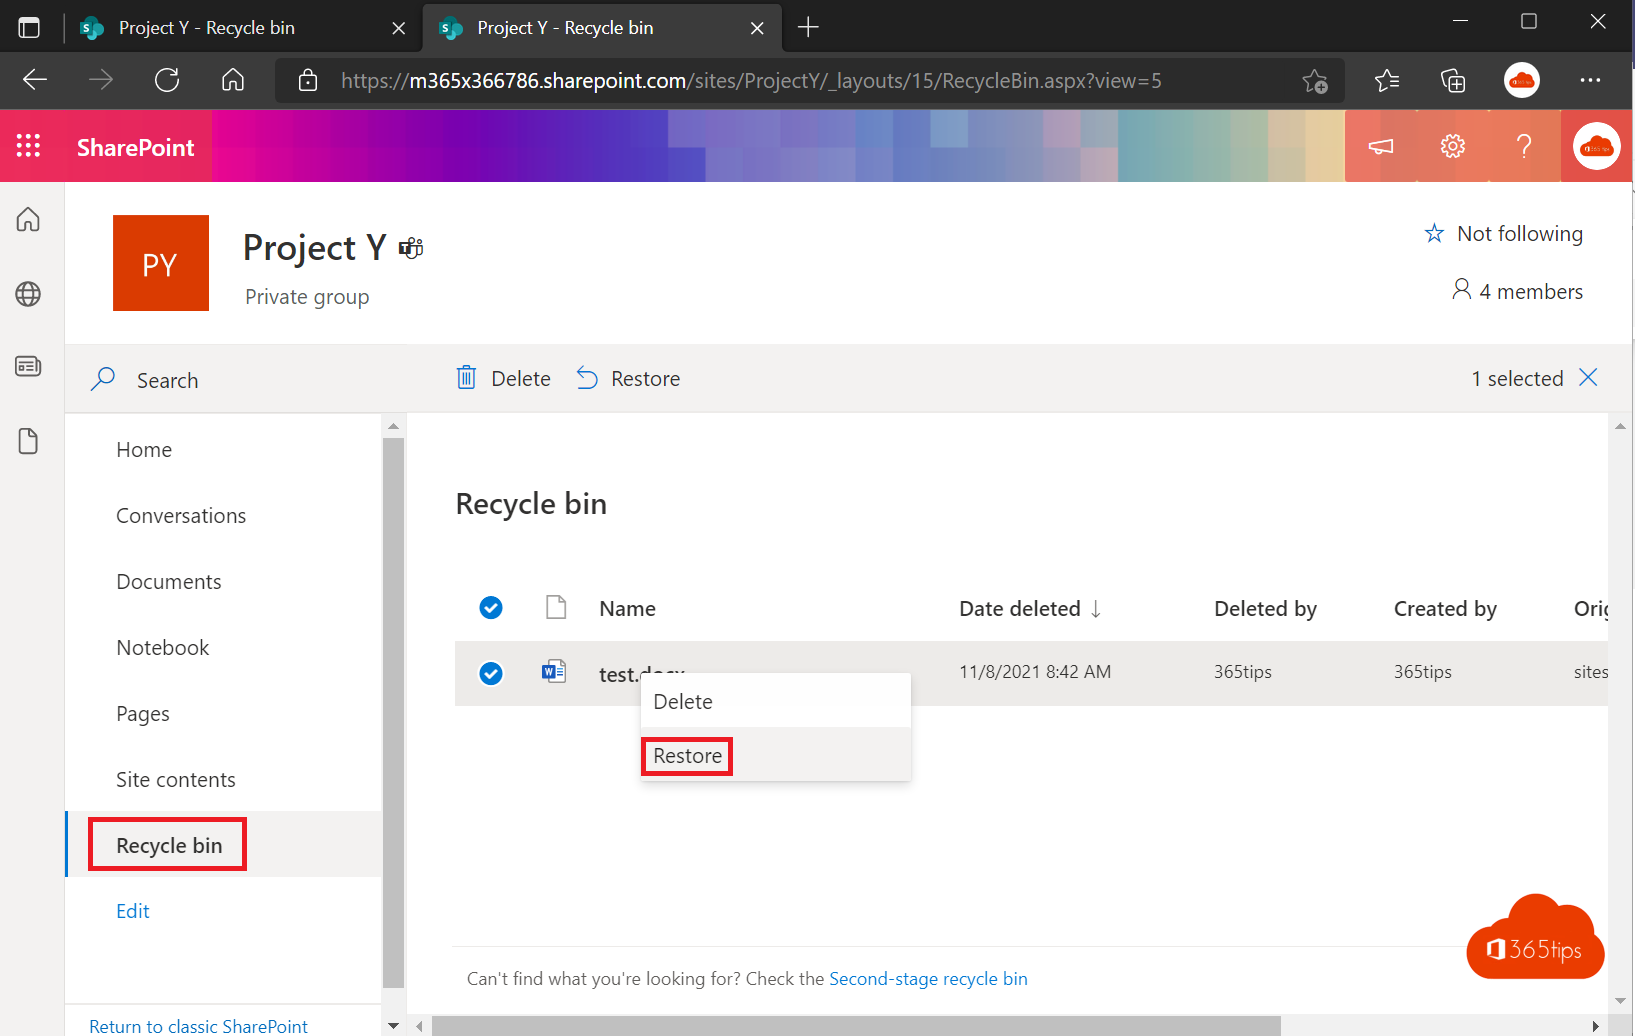 Tutorial: How to recover deleted files in Microsoft Teams or SharePoint?